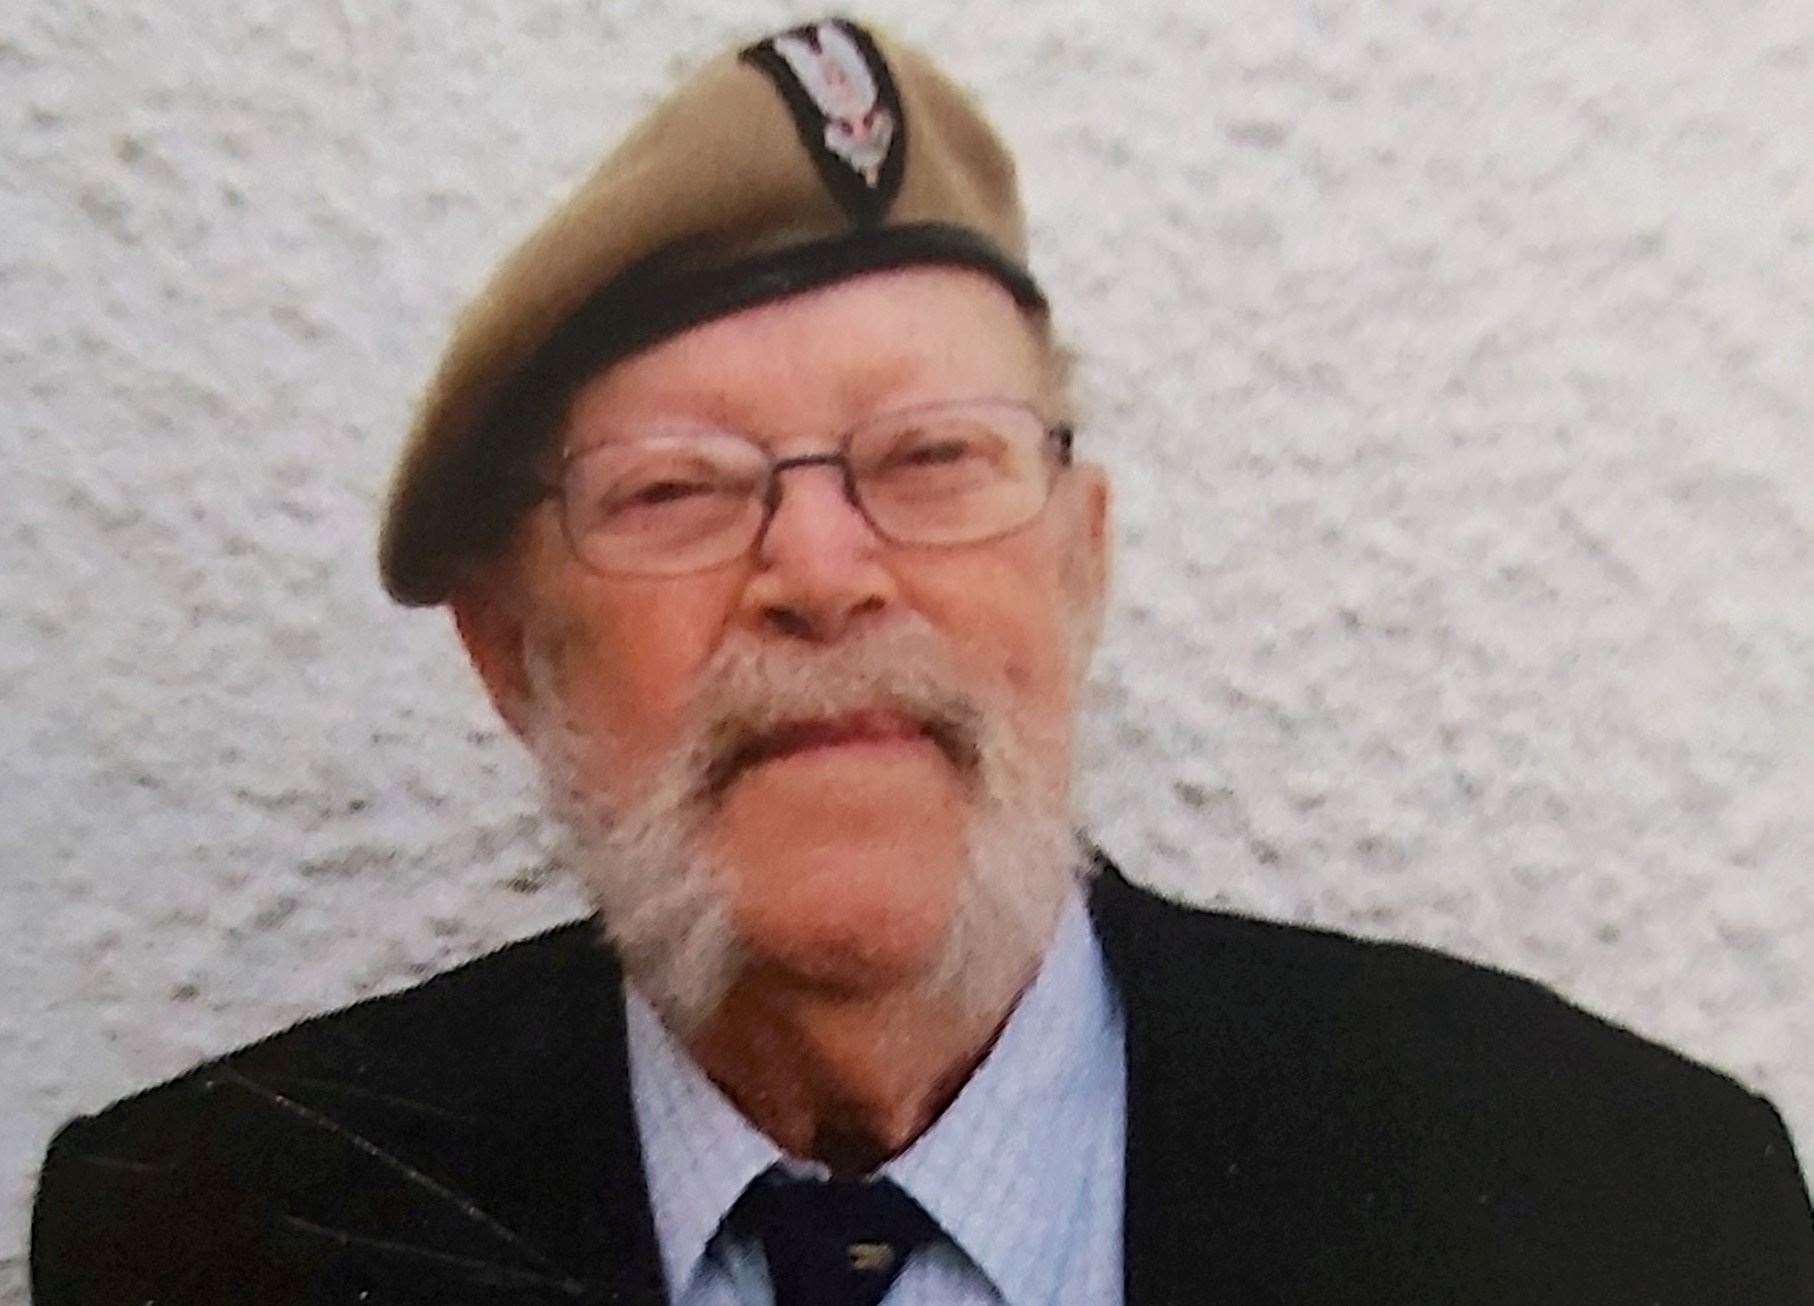 Alec Borrie, from Erith, died aged 98 earlier this month. Picture: SWNS